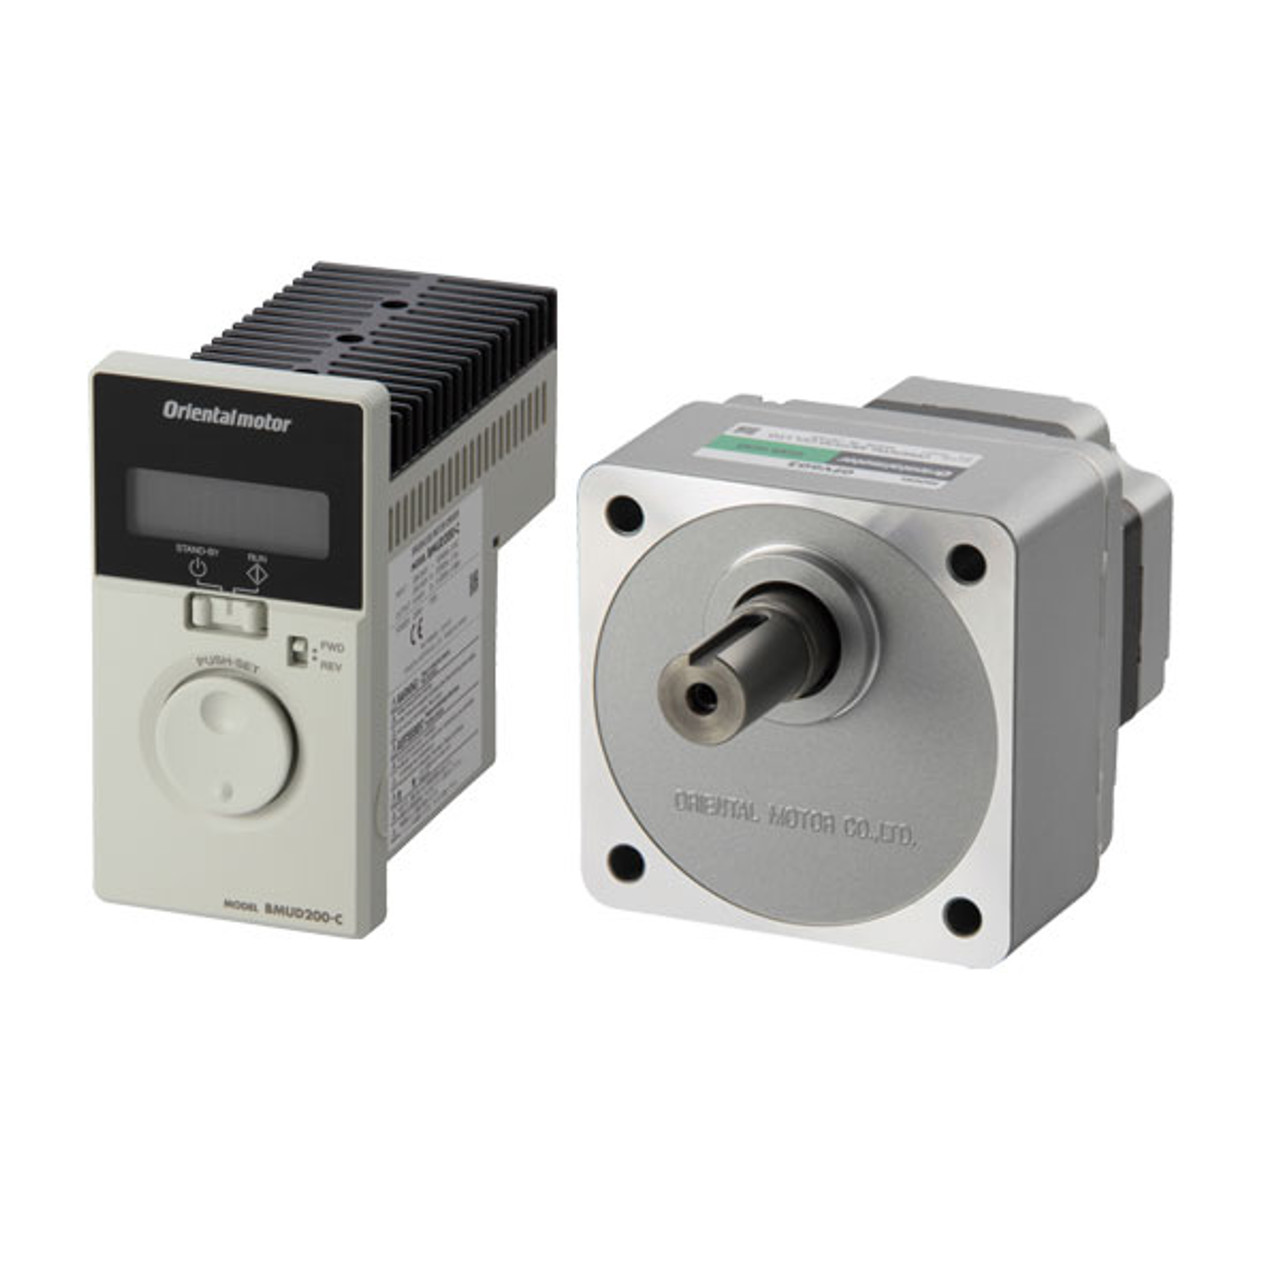 BMU6200SCP-20A - Product Image